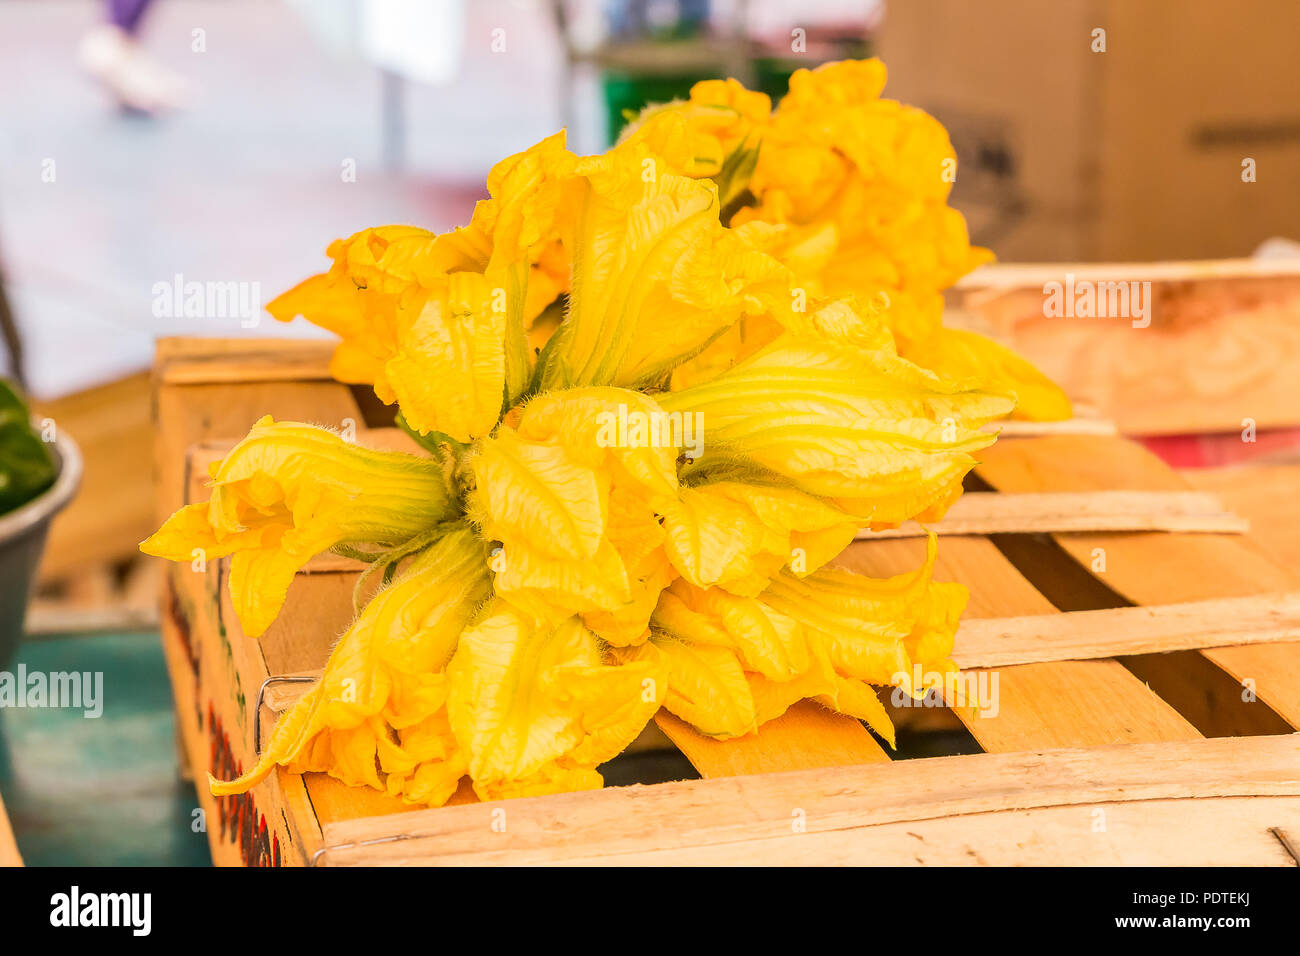 Traditional delicacy from South of France - courgette or zucchini flowers at the market on Cours Saleya in in the Old Town, Vieille Ville in Nice, Fre Stock Photo